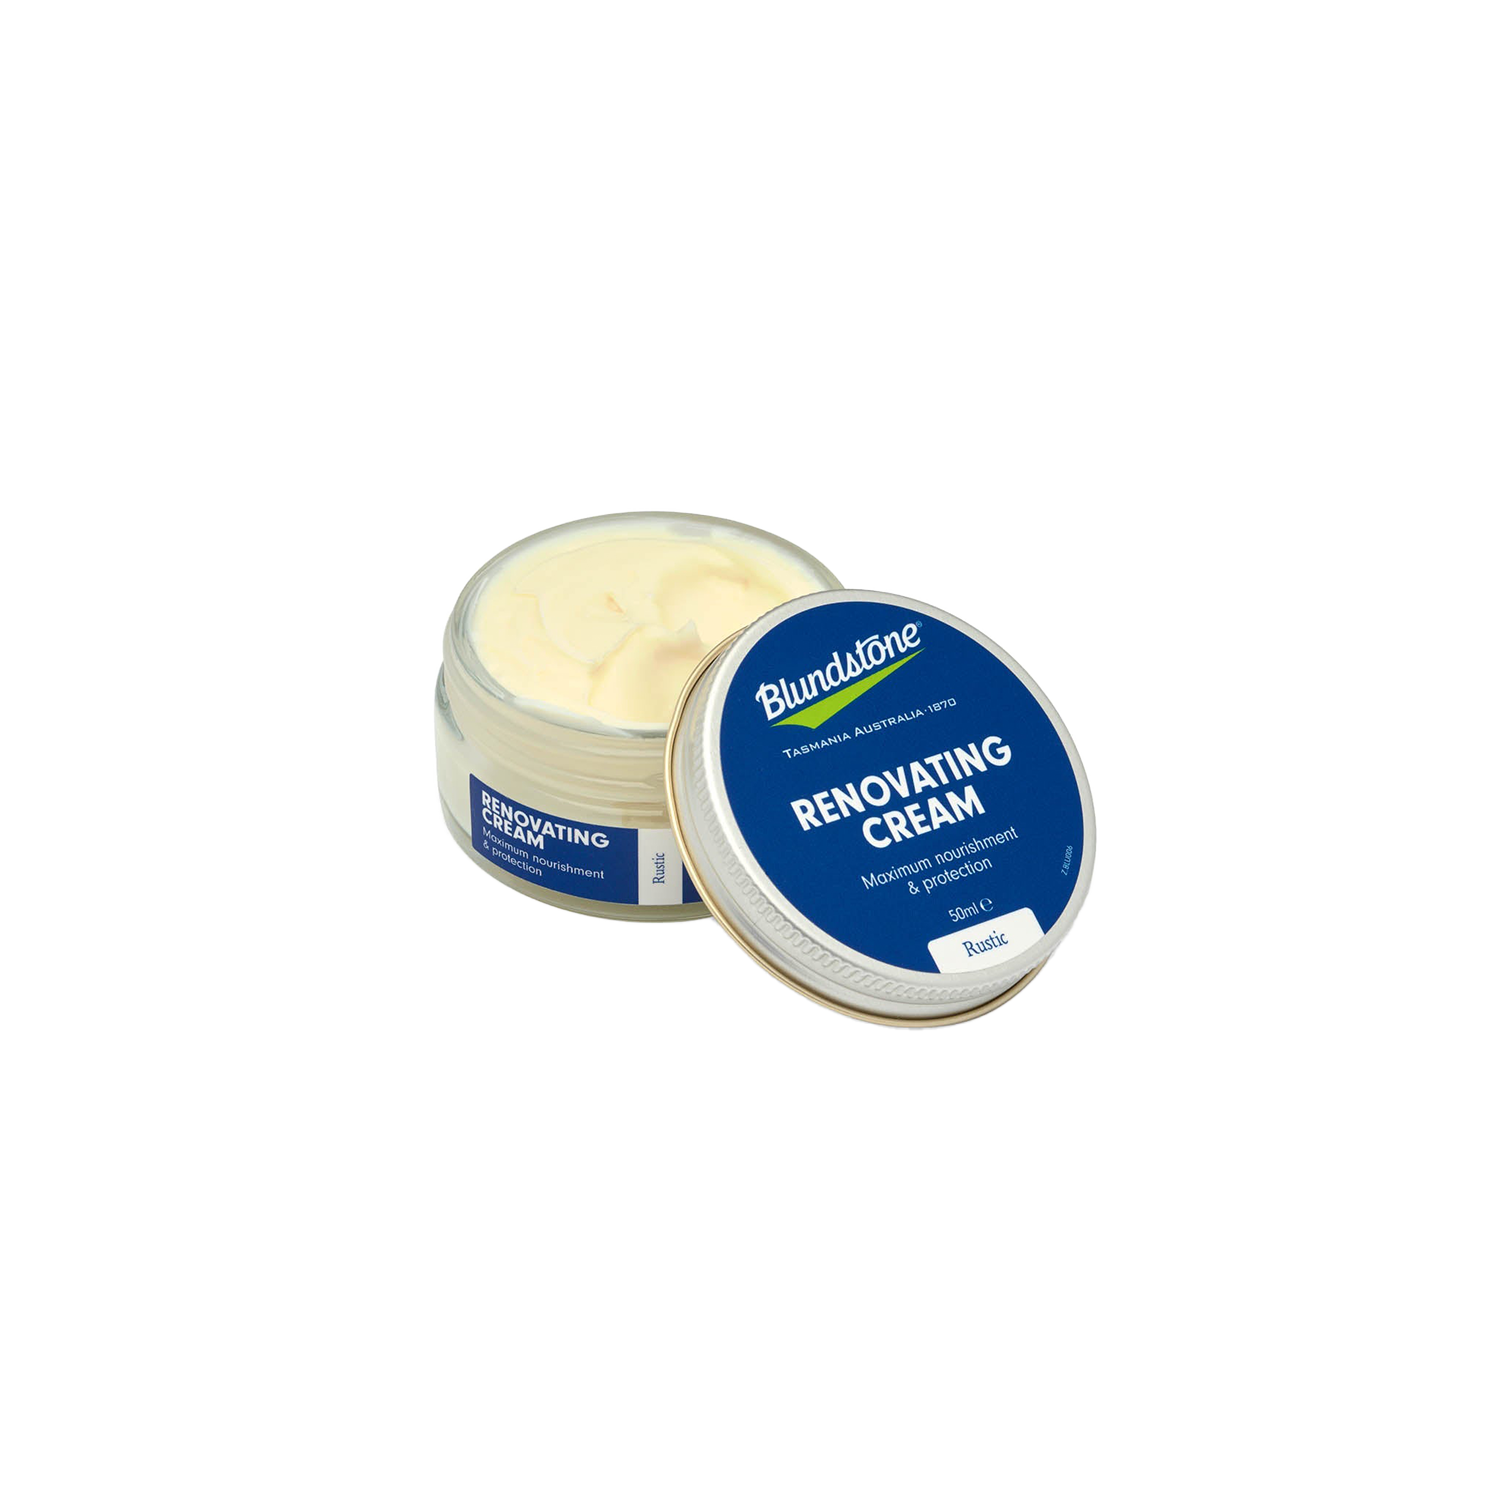 What is Blundstone Renovating Cream Made of?